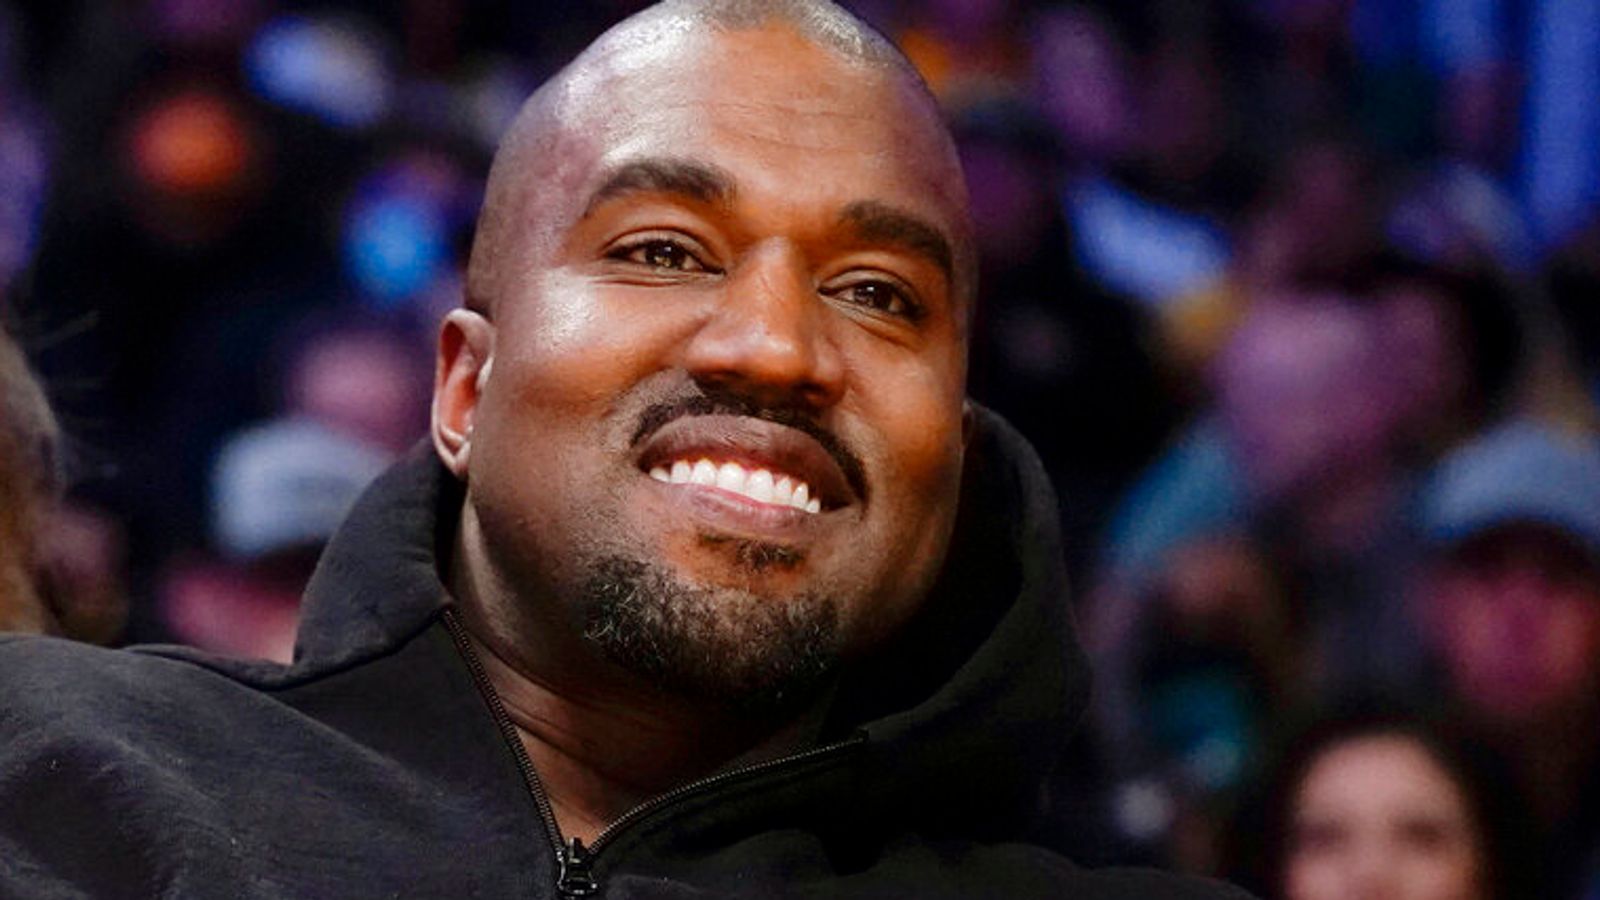 Kanye West claims he lost bn in a day after Adidas ended Yeezy deal